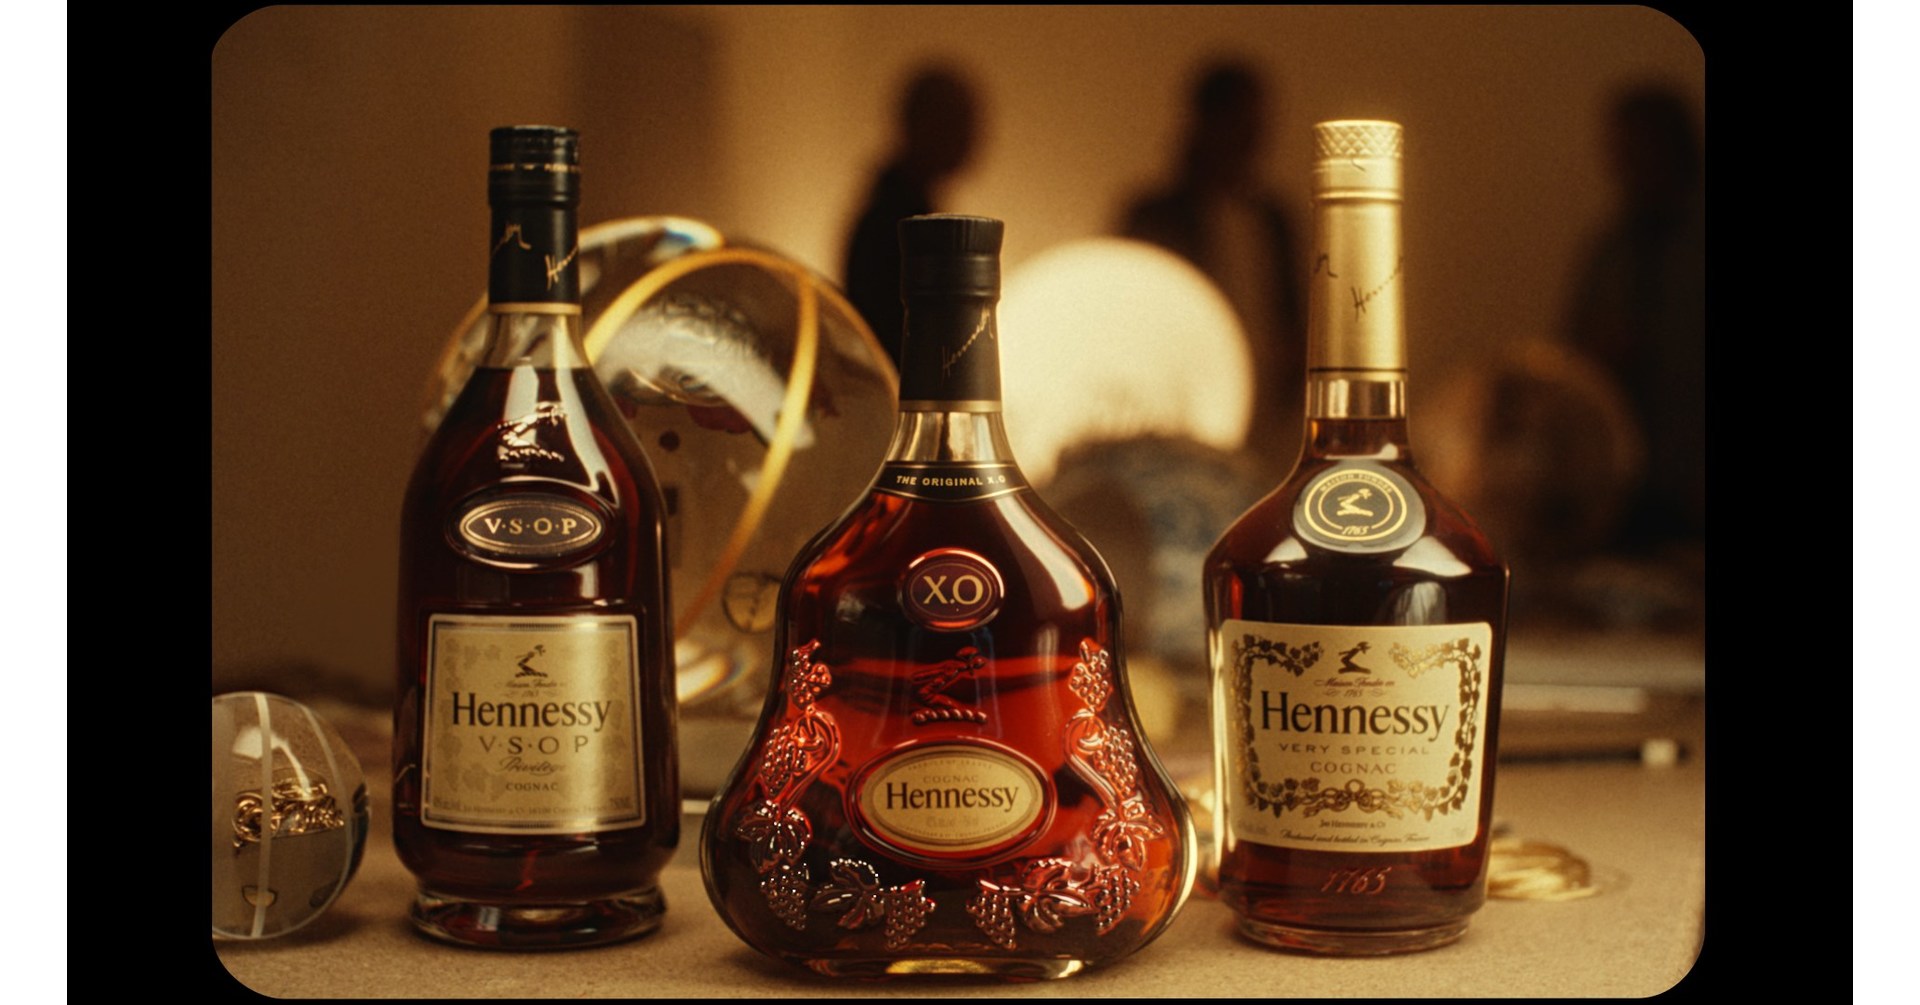 Who Owns Hennessy? - FourWeekMBA